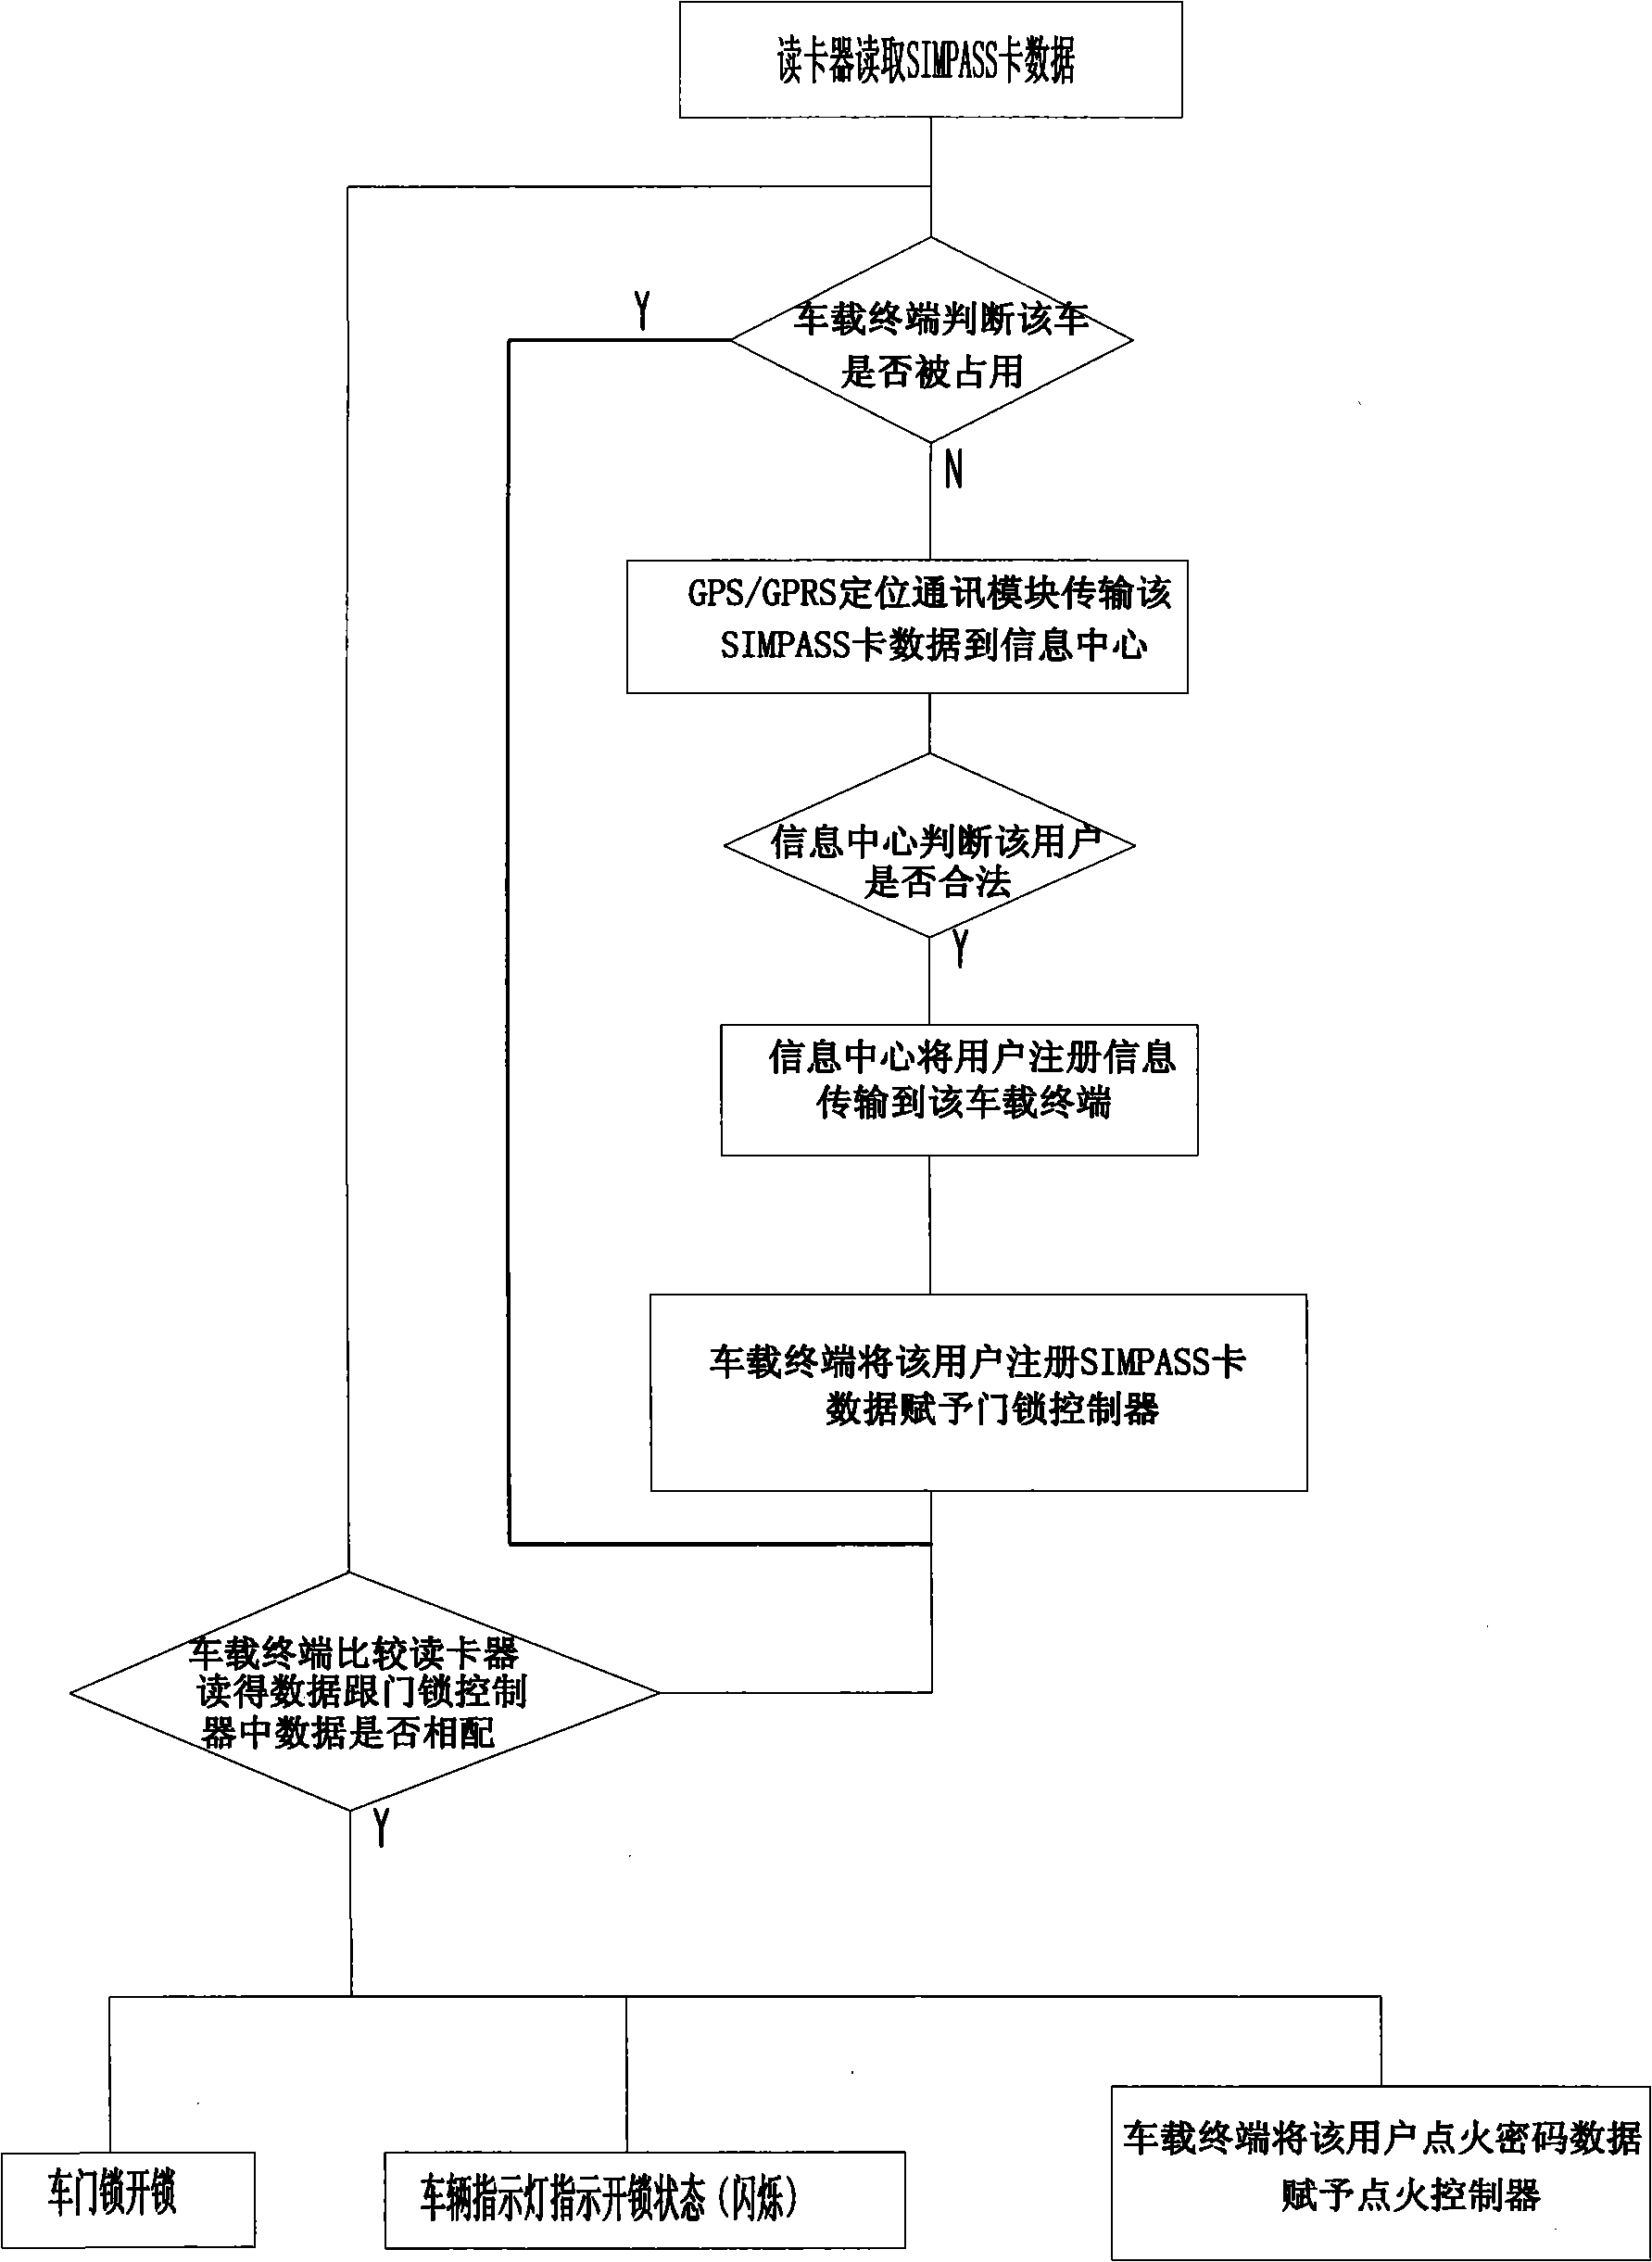 Automobile renting system and method convenient for returning automobile